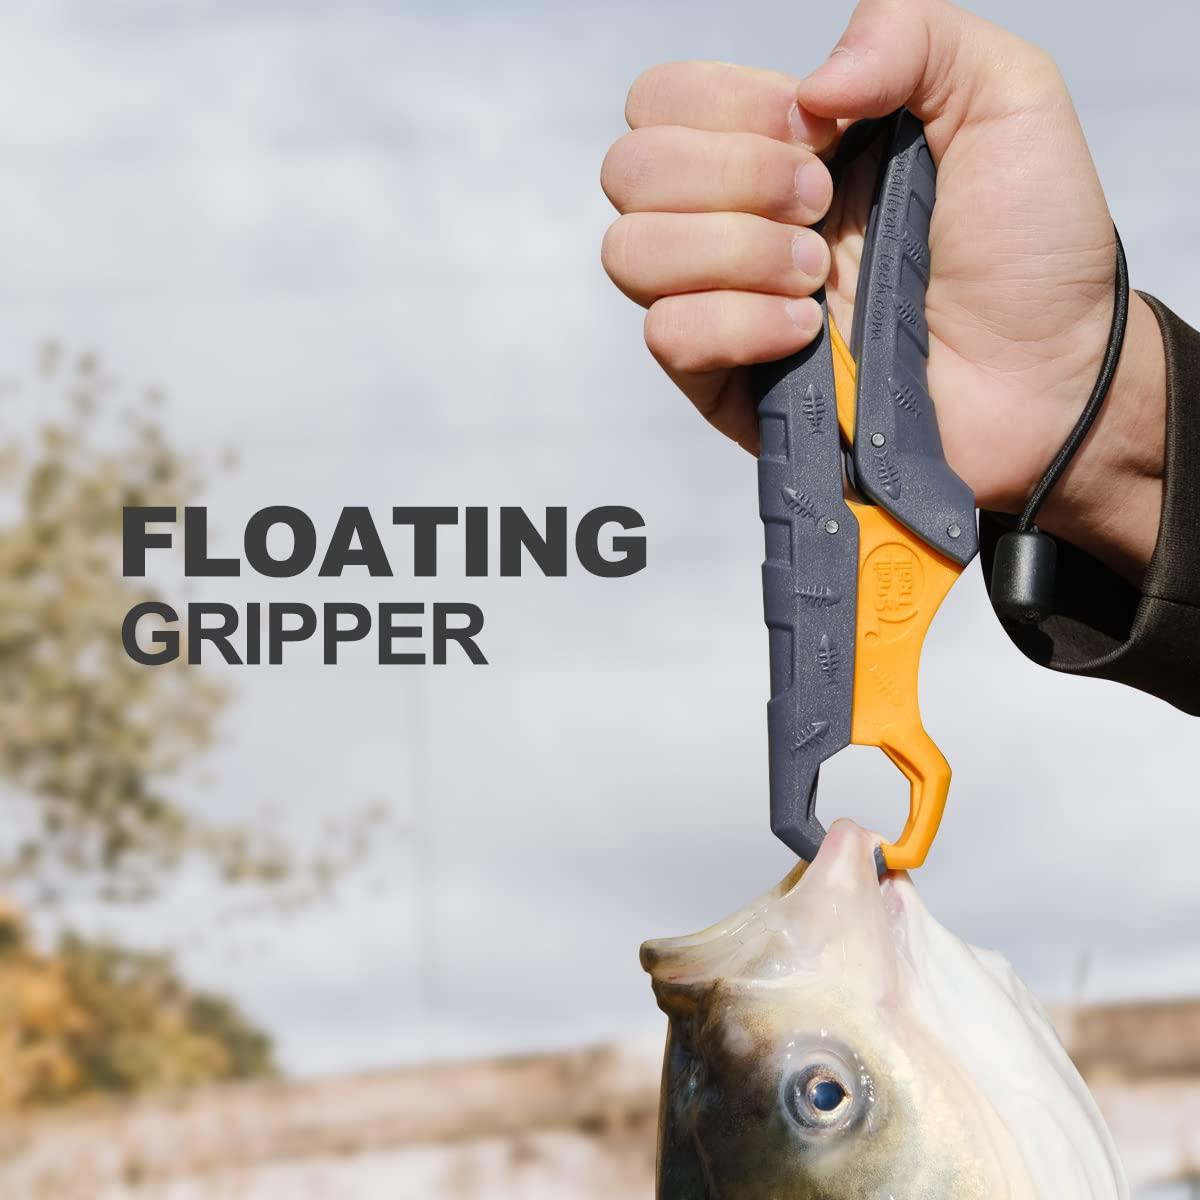 SNAIL TRAIL Fish Scale with 7.5'' Floating Lip Gripper, 50 lbs